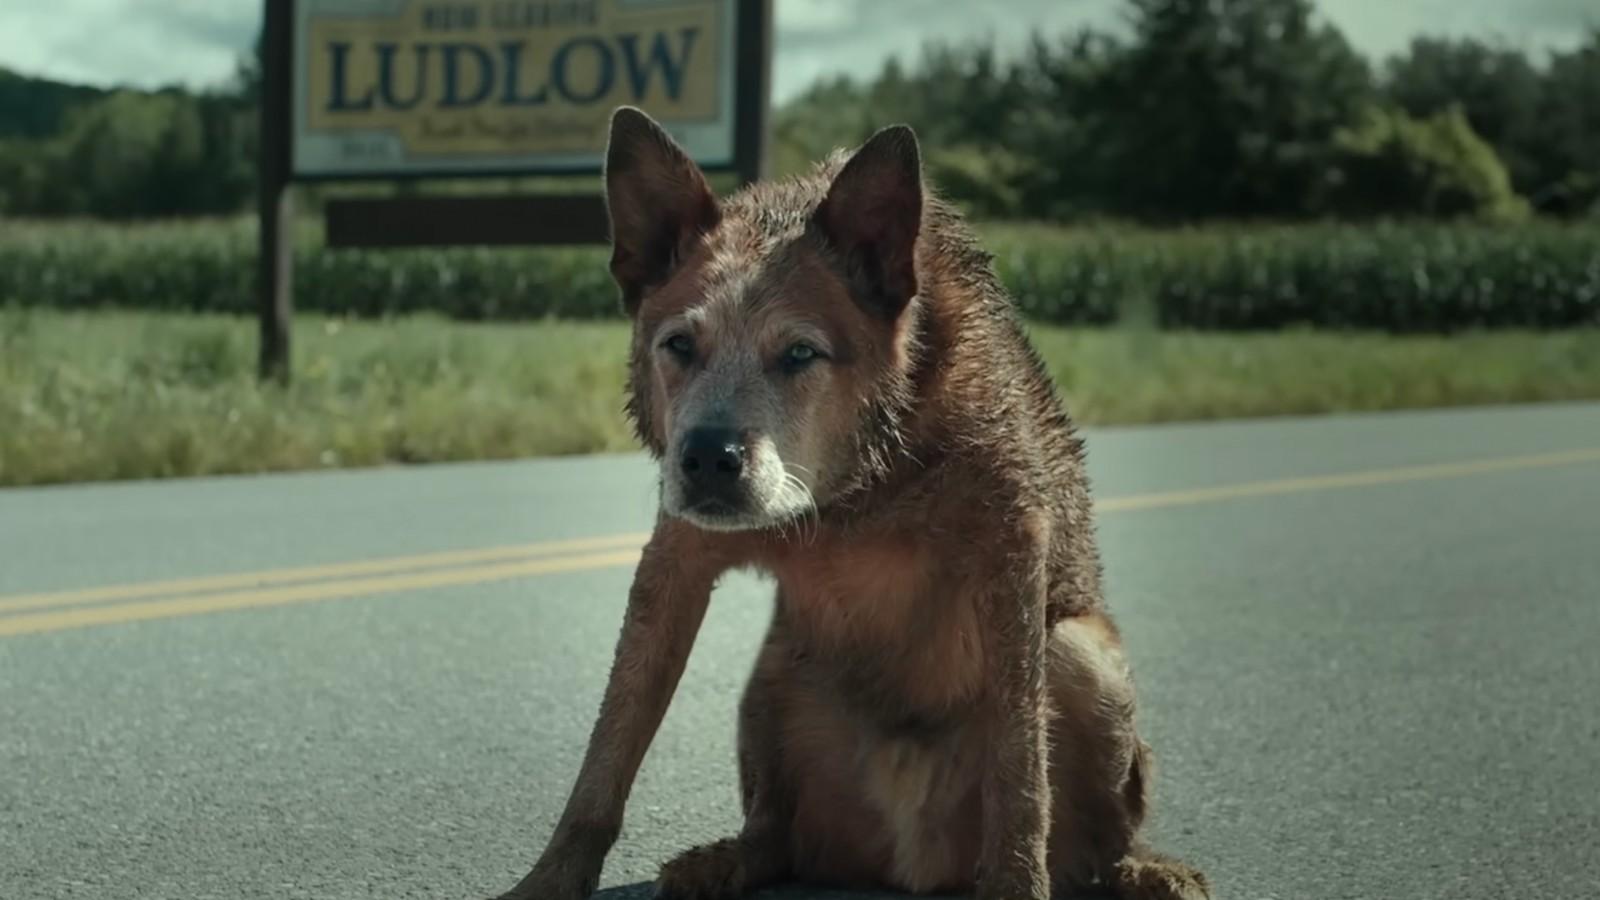 Zombie dog looking scary in Pet Sematary: Bloodlines.